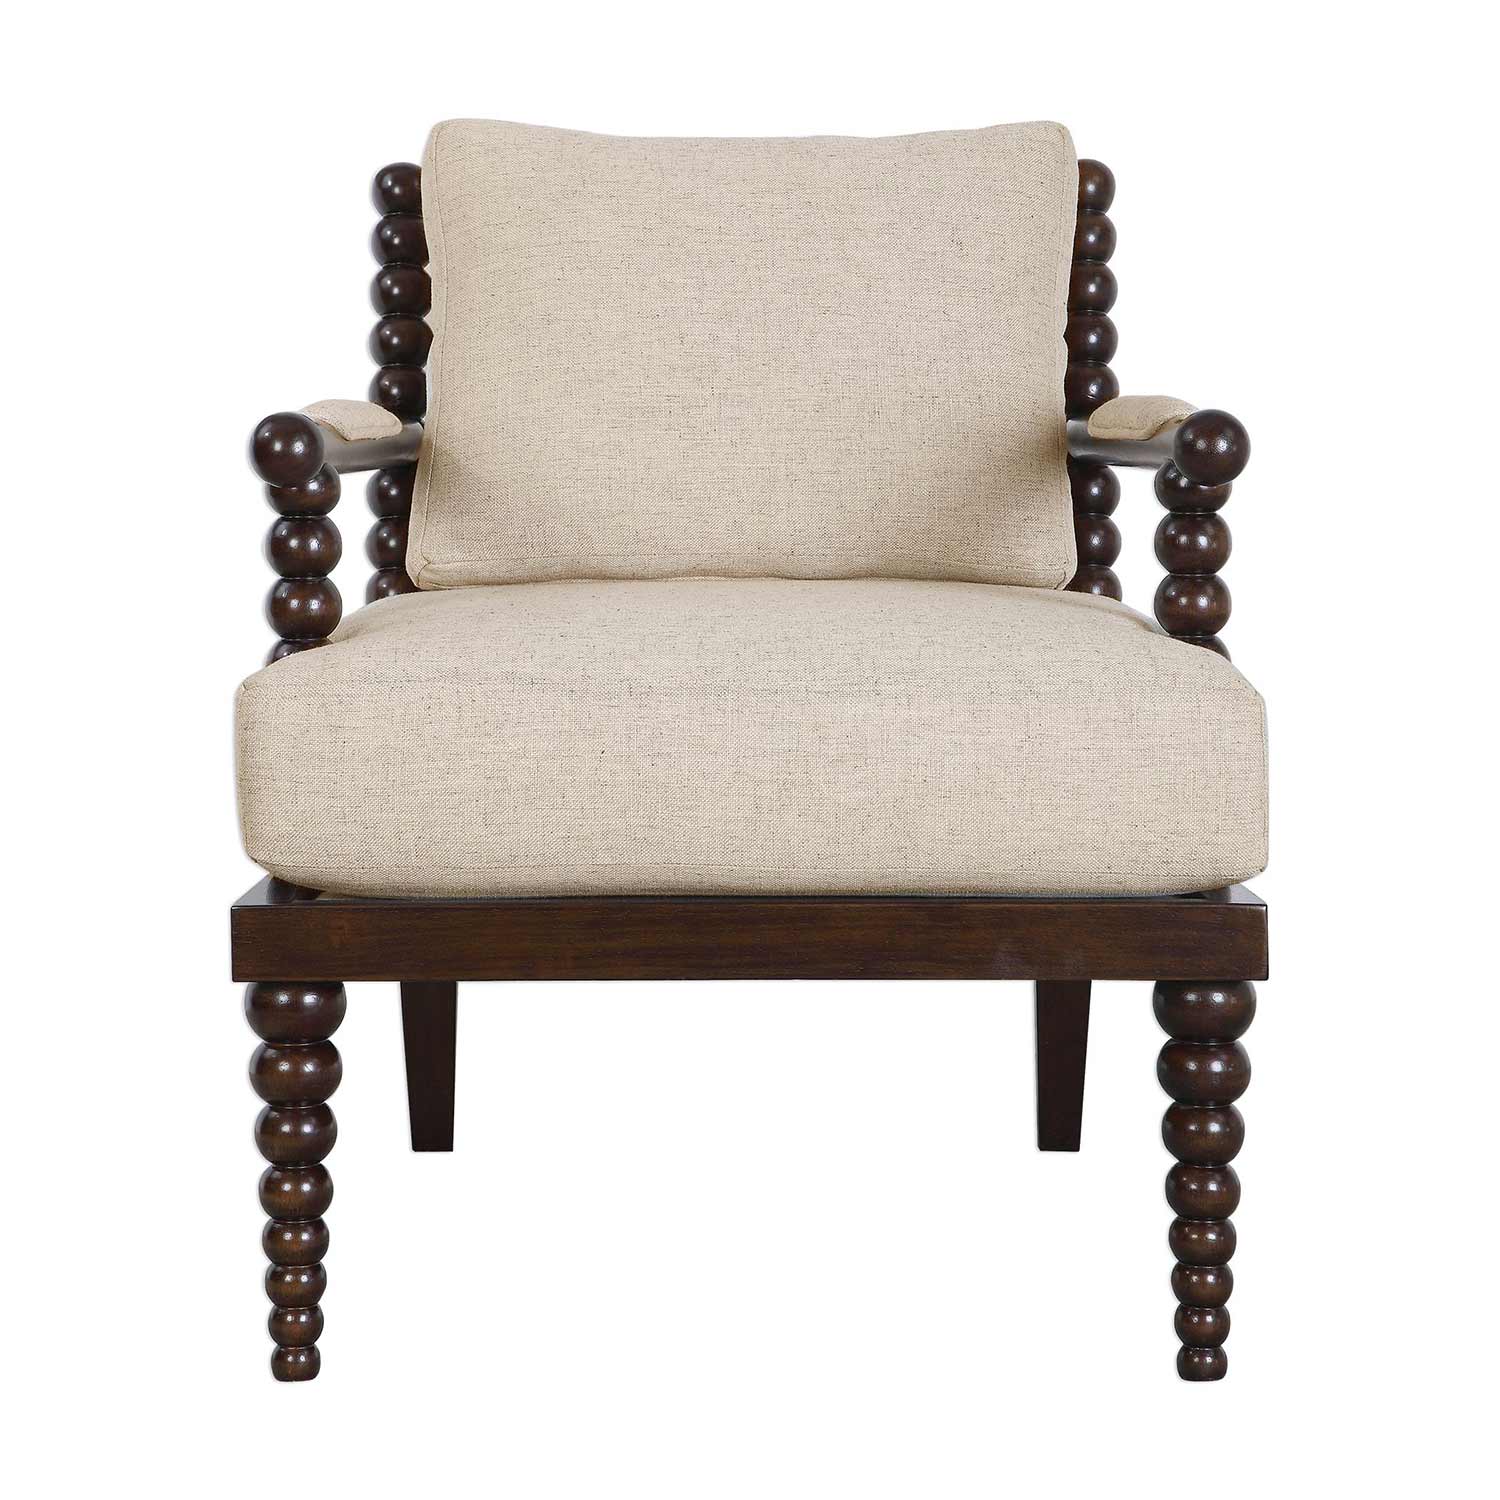 Uttermost Lachlan Accent Chair - Oatmeal